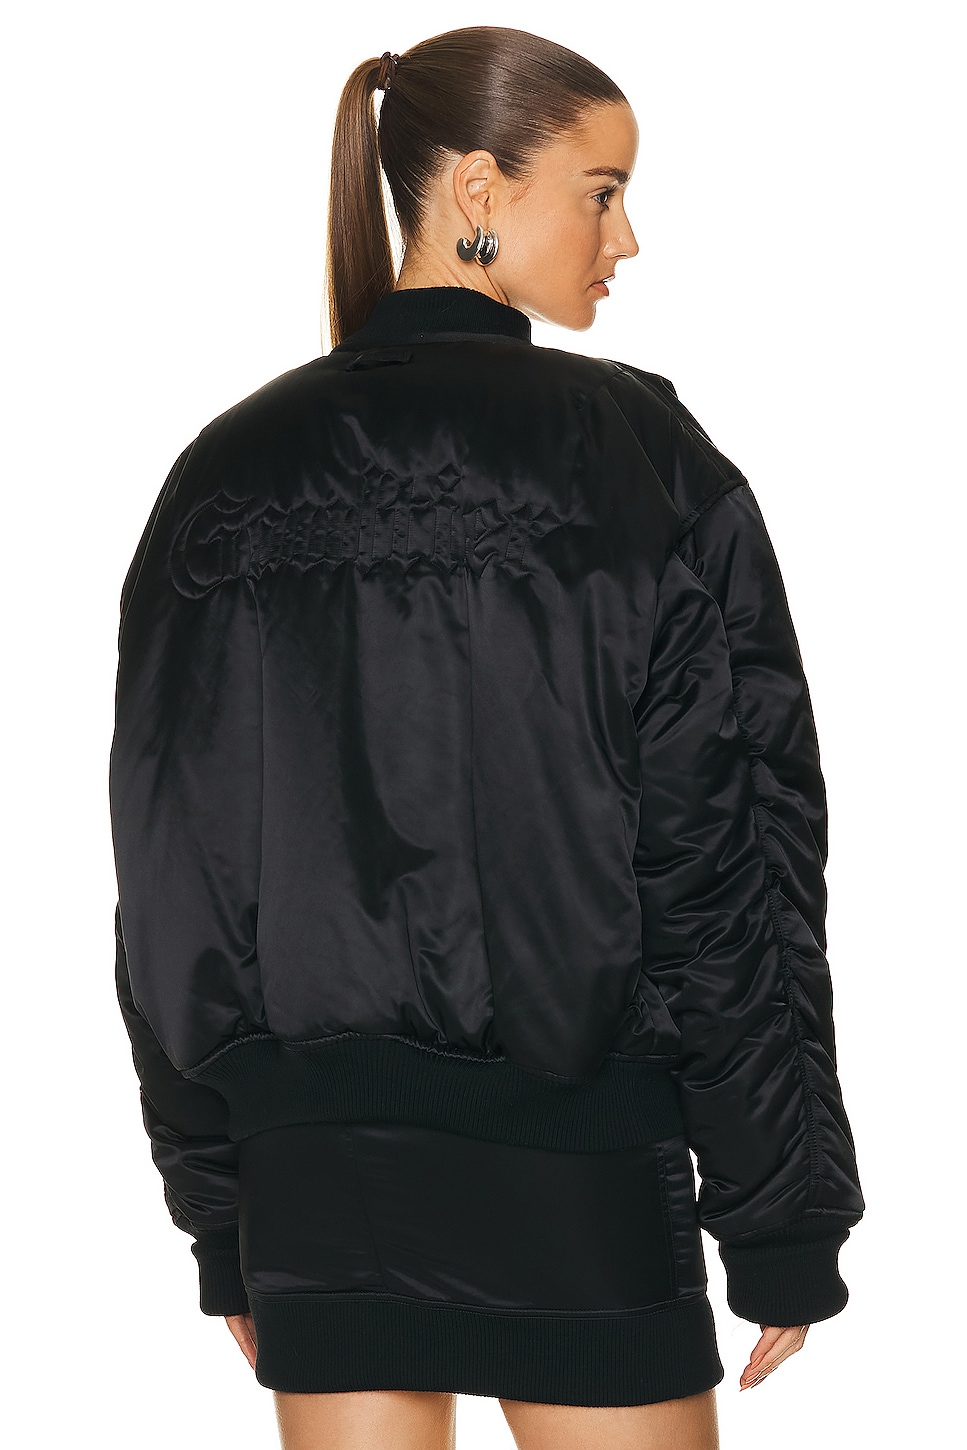 Image 1 of Jean Paul Gaultier Embroidered Oversize Bomber Jacket in Black